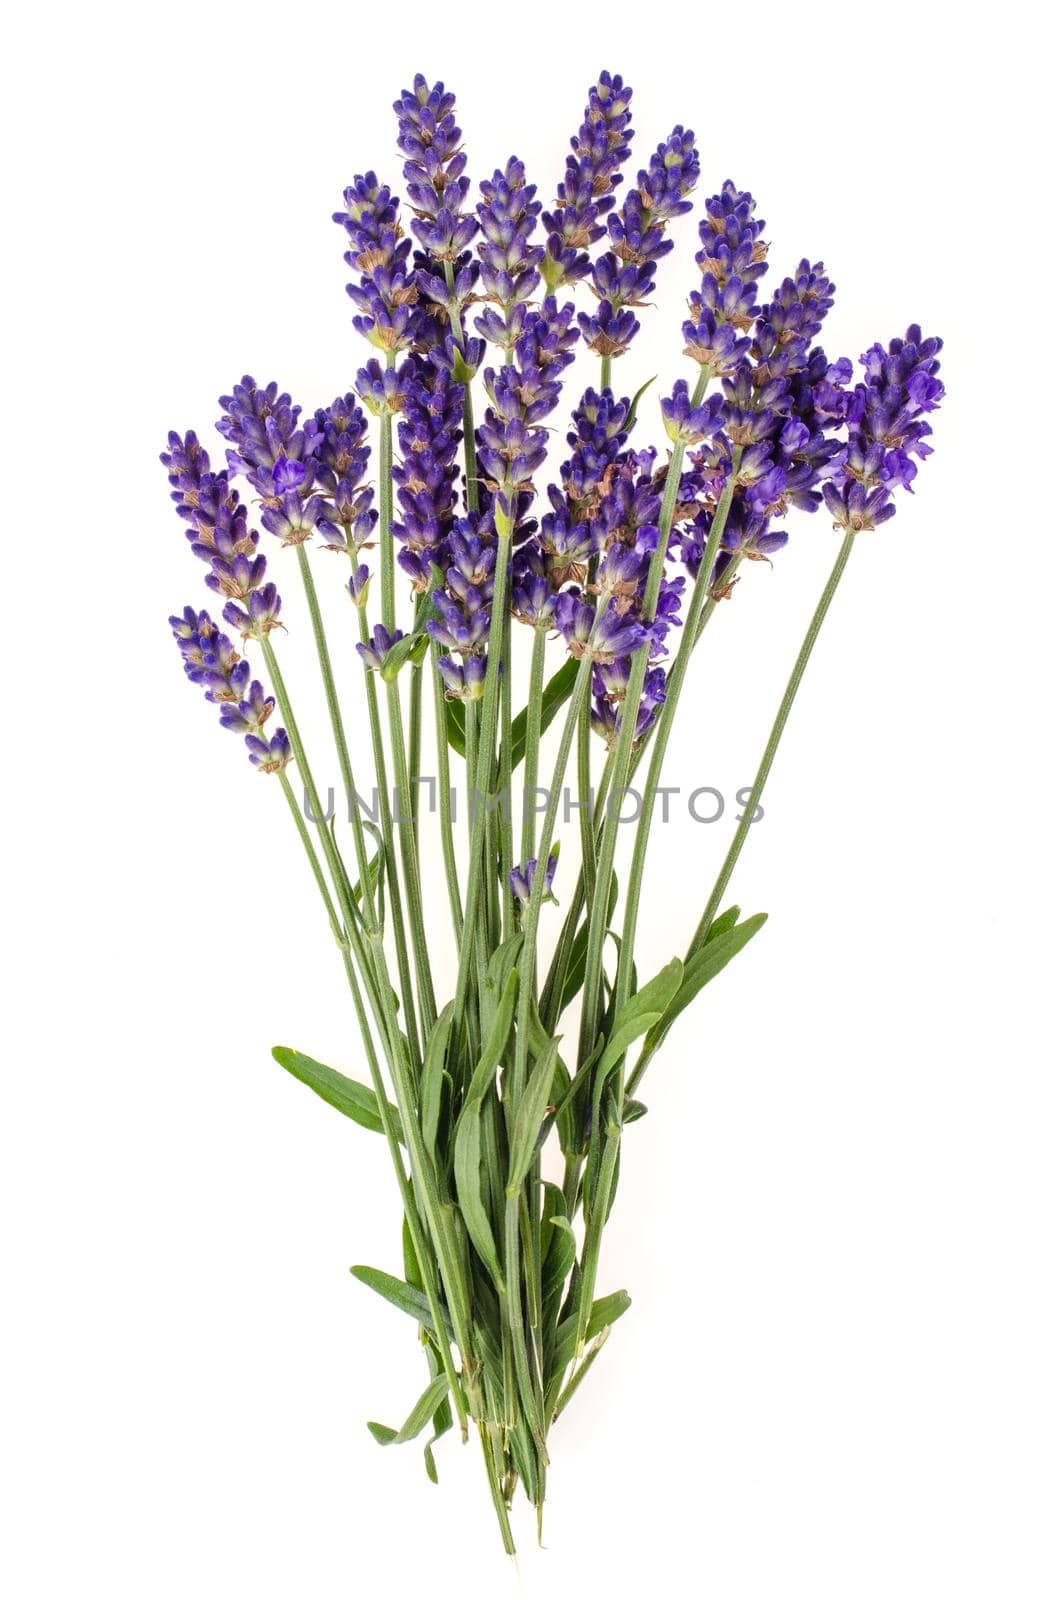 Small bunch of blue lavender flowers. Photo by ArtCookStudio